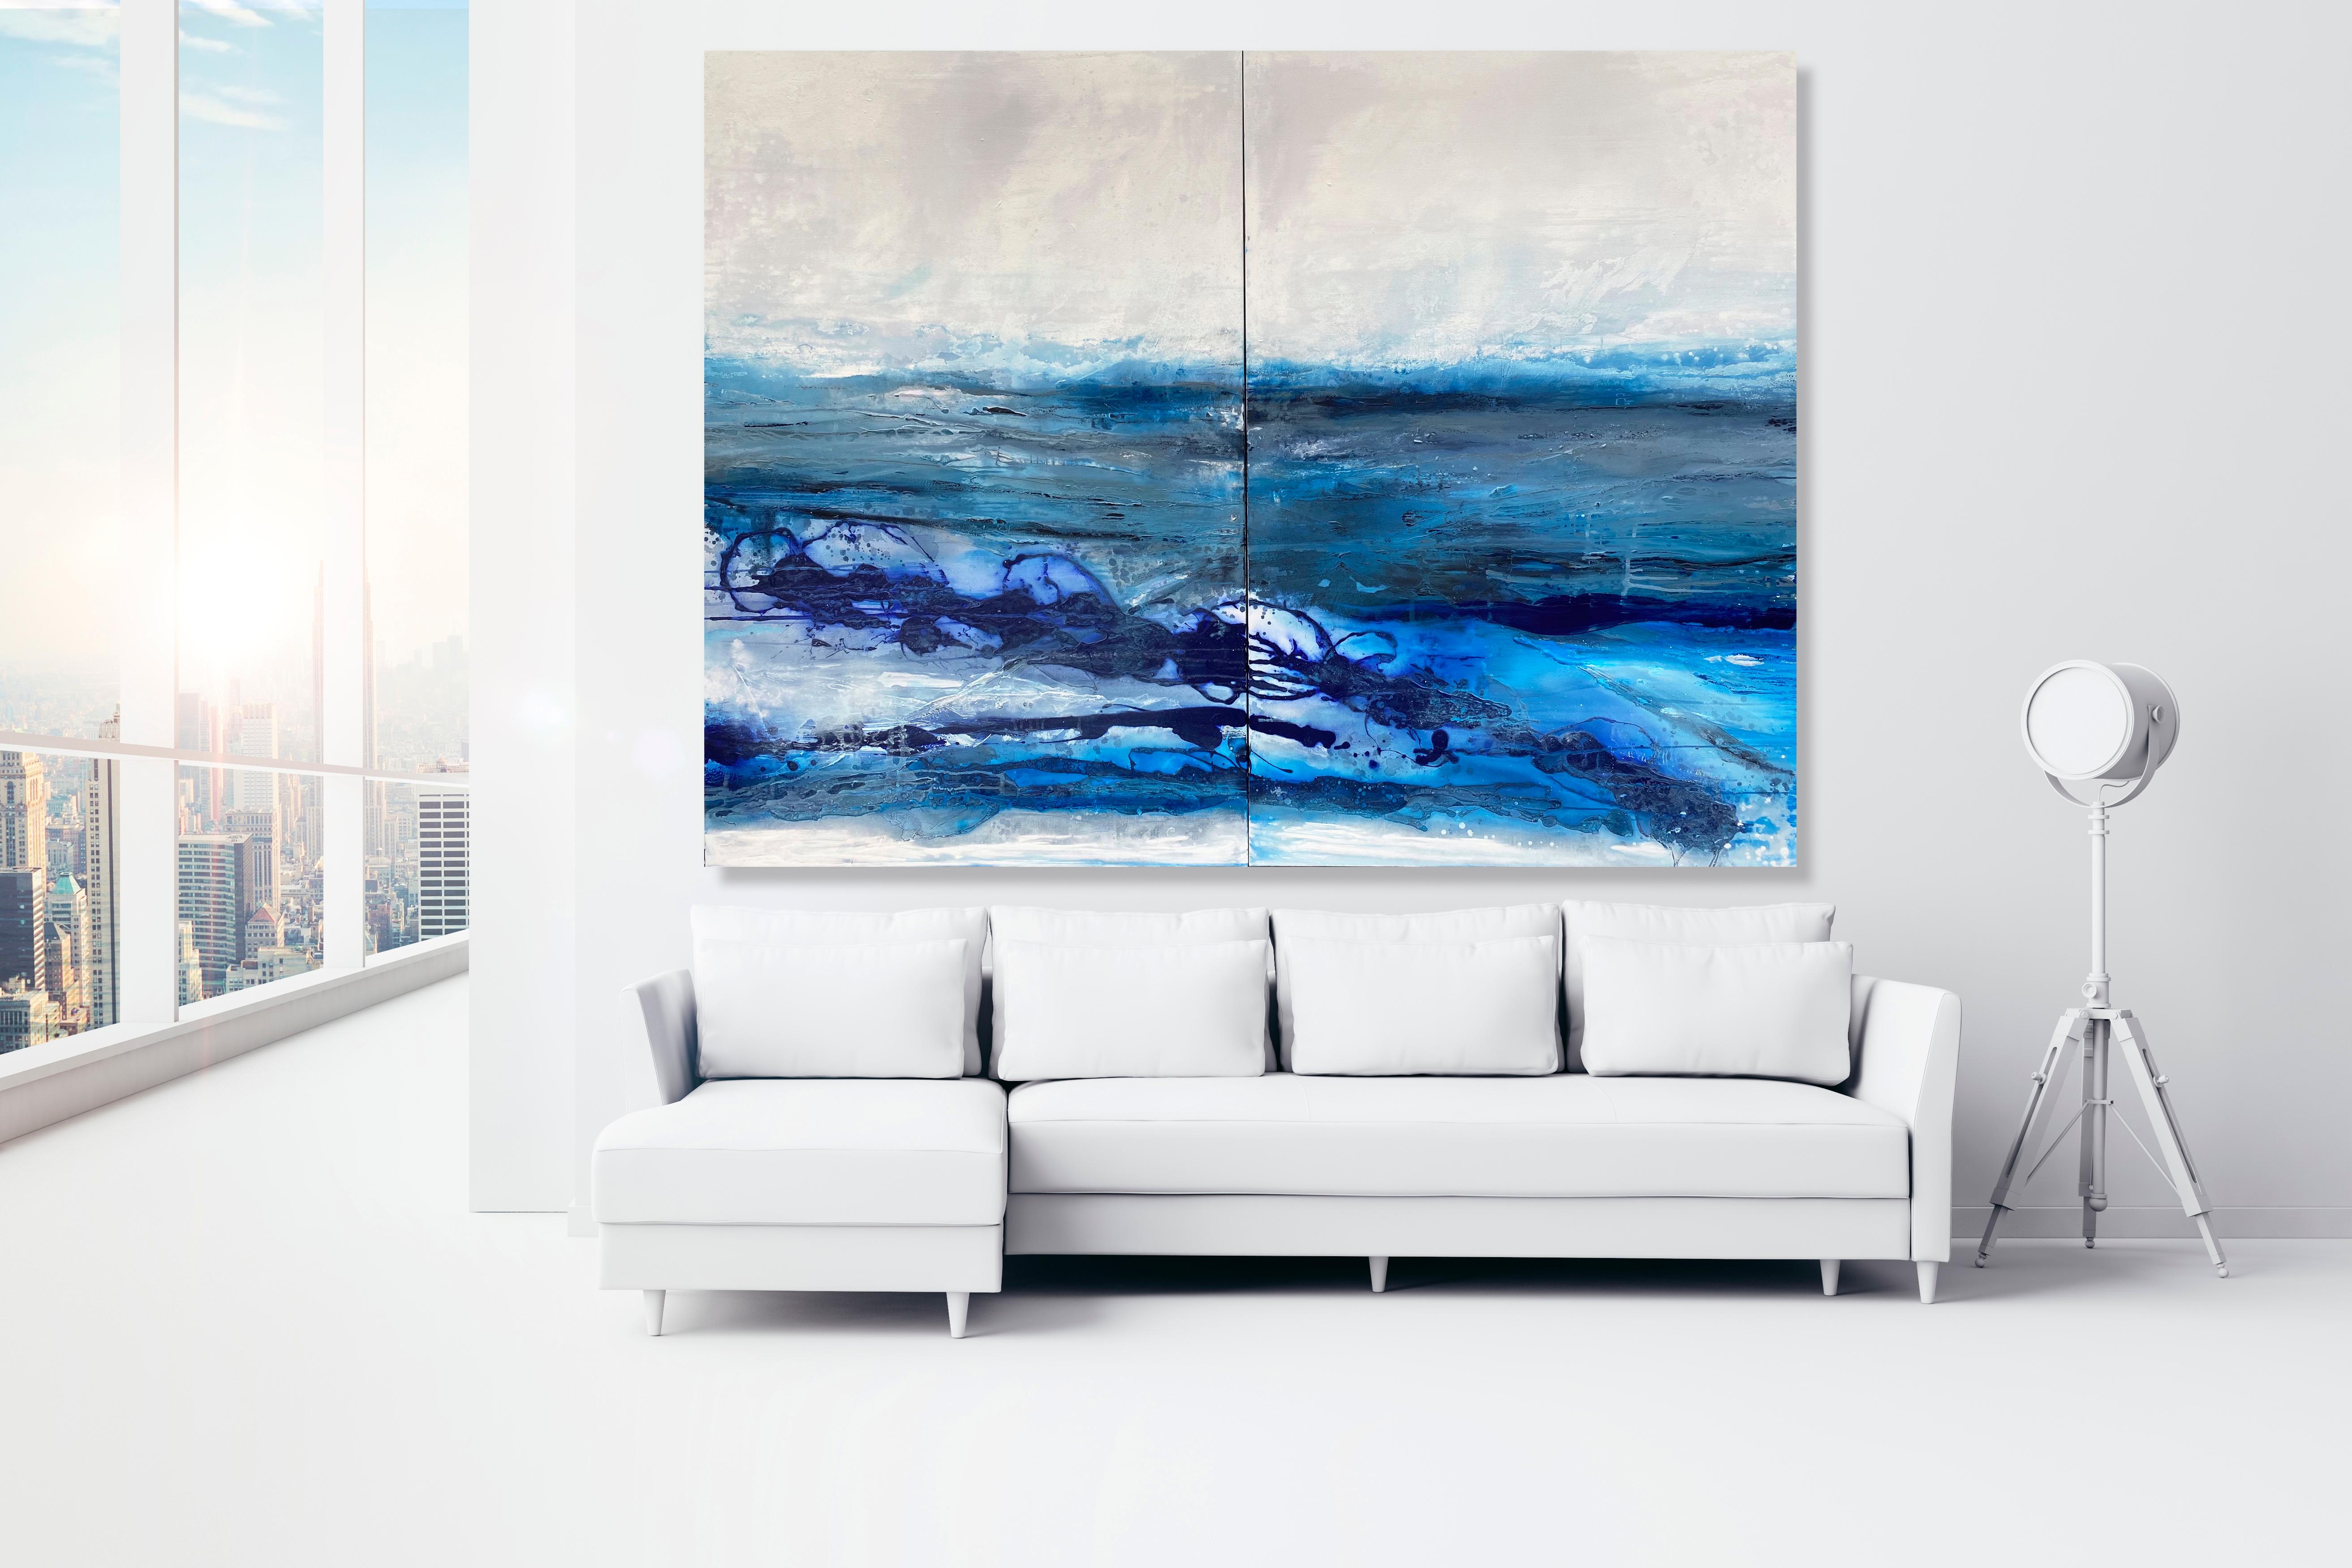 Breakwall  large scale double panel abstract expressionist painting blue cobalt - Painting by Kathleen Rhee